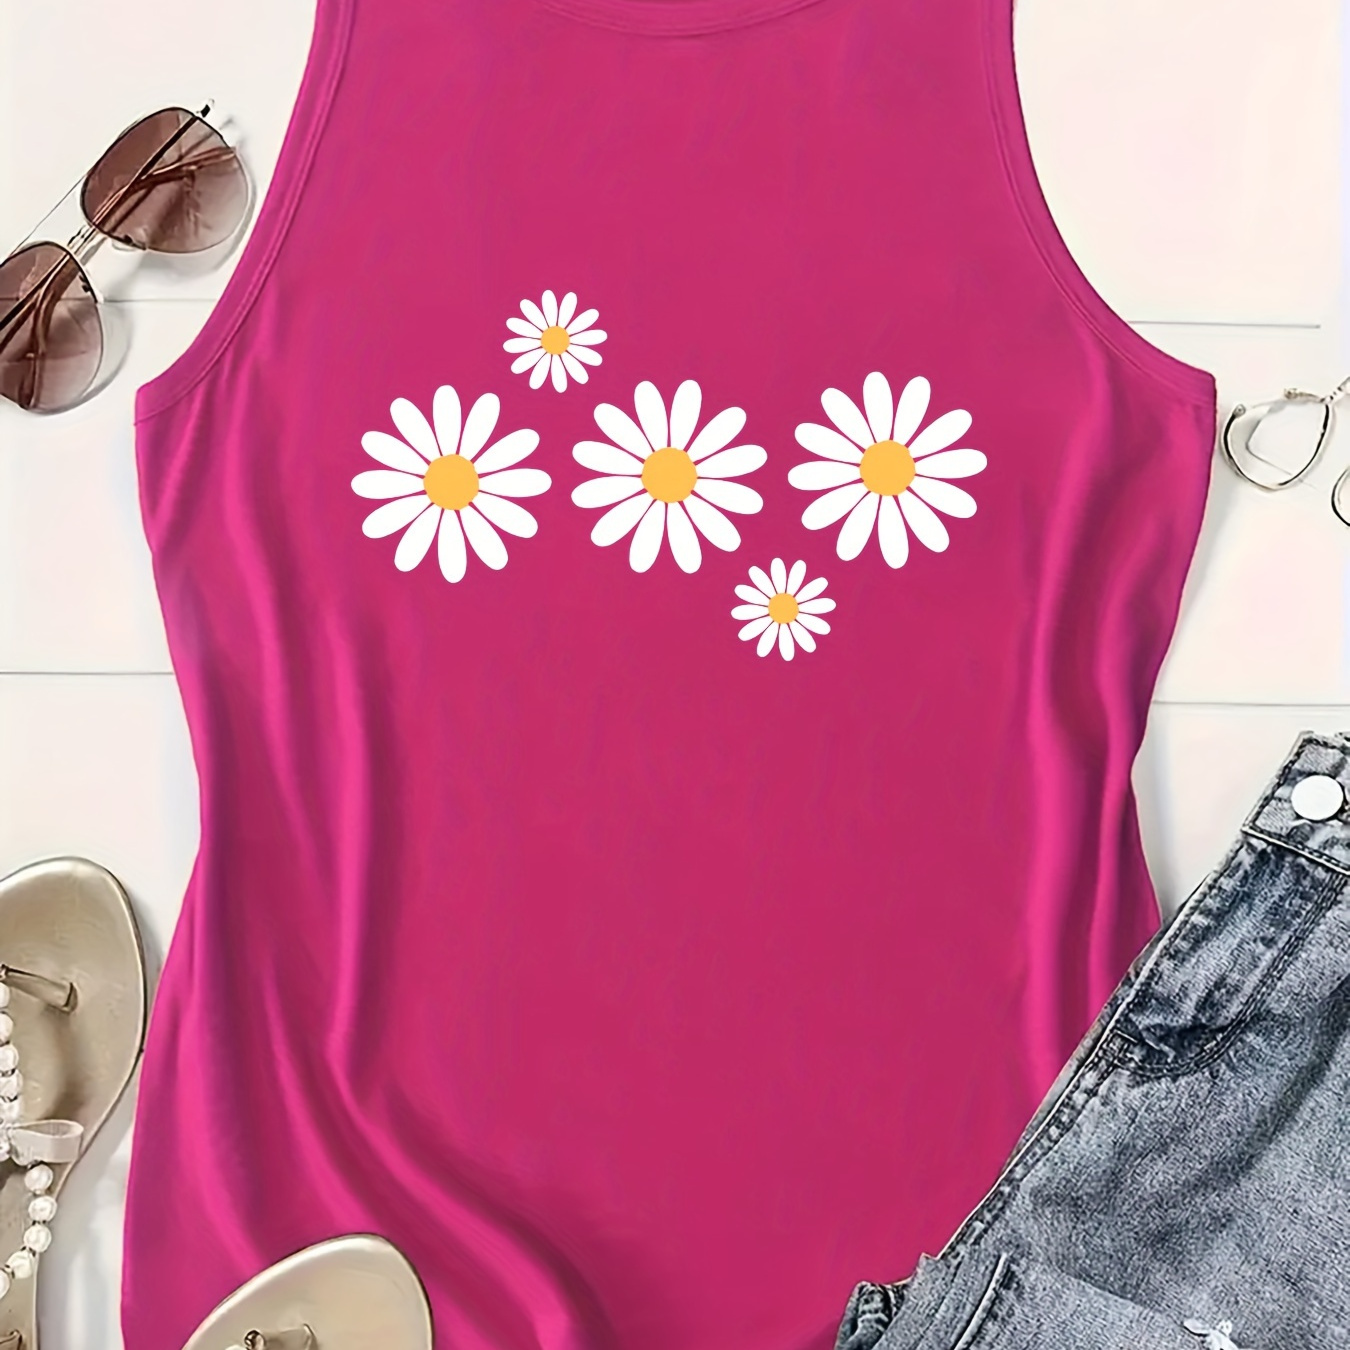 

Women's Fashion Sleeveless Tank Top With Daisy Print, Casual Round Neck, Racerback Vest